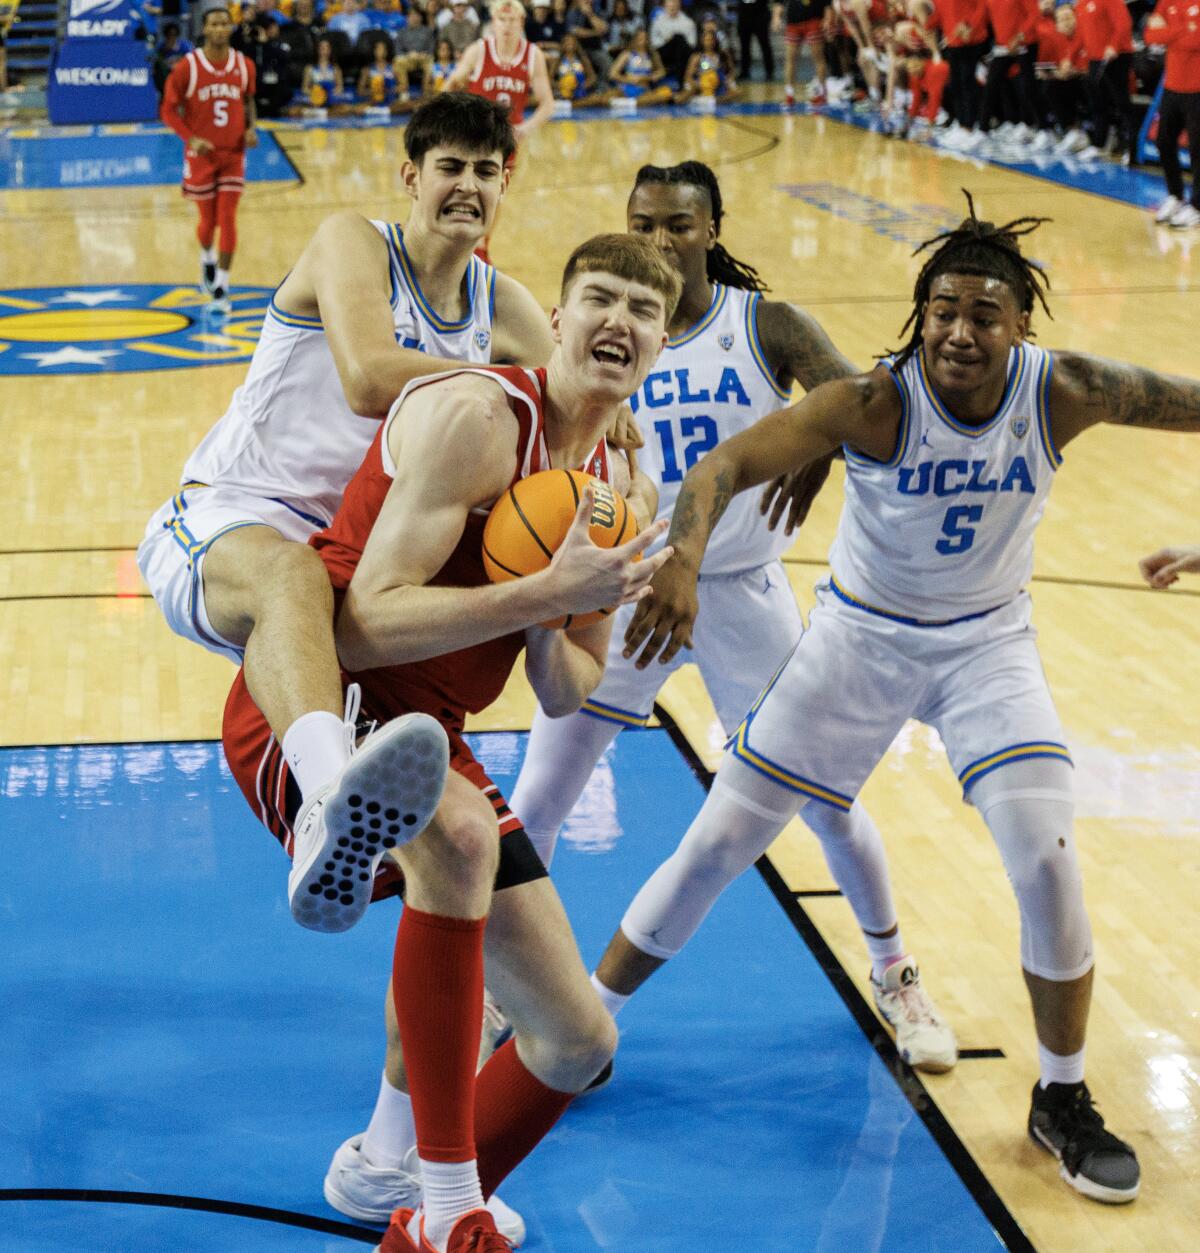 UCLA center Aday Mara climbs on the back of Utah center Lawson Lovering while battling for a rebound.